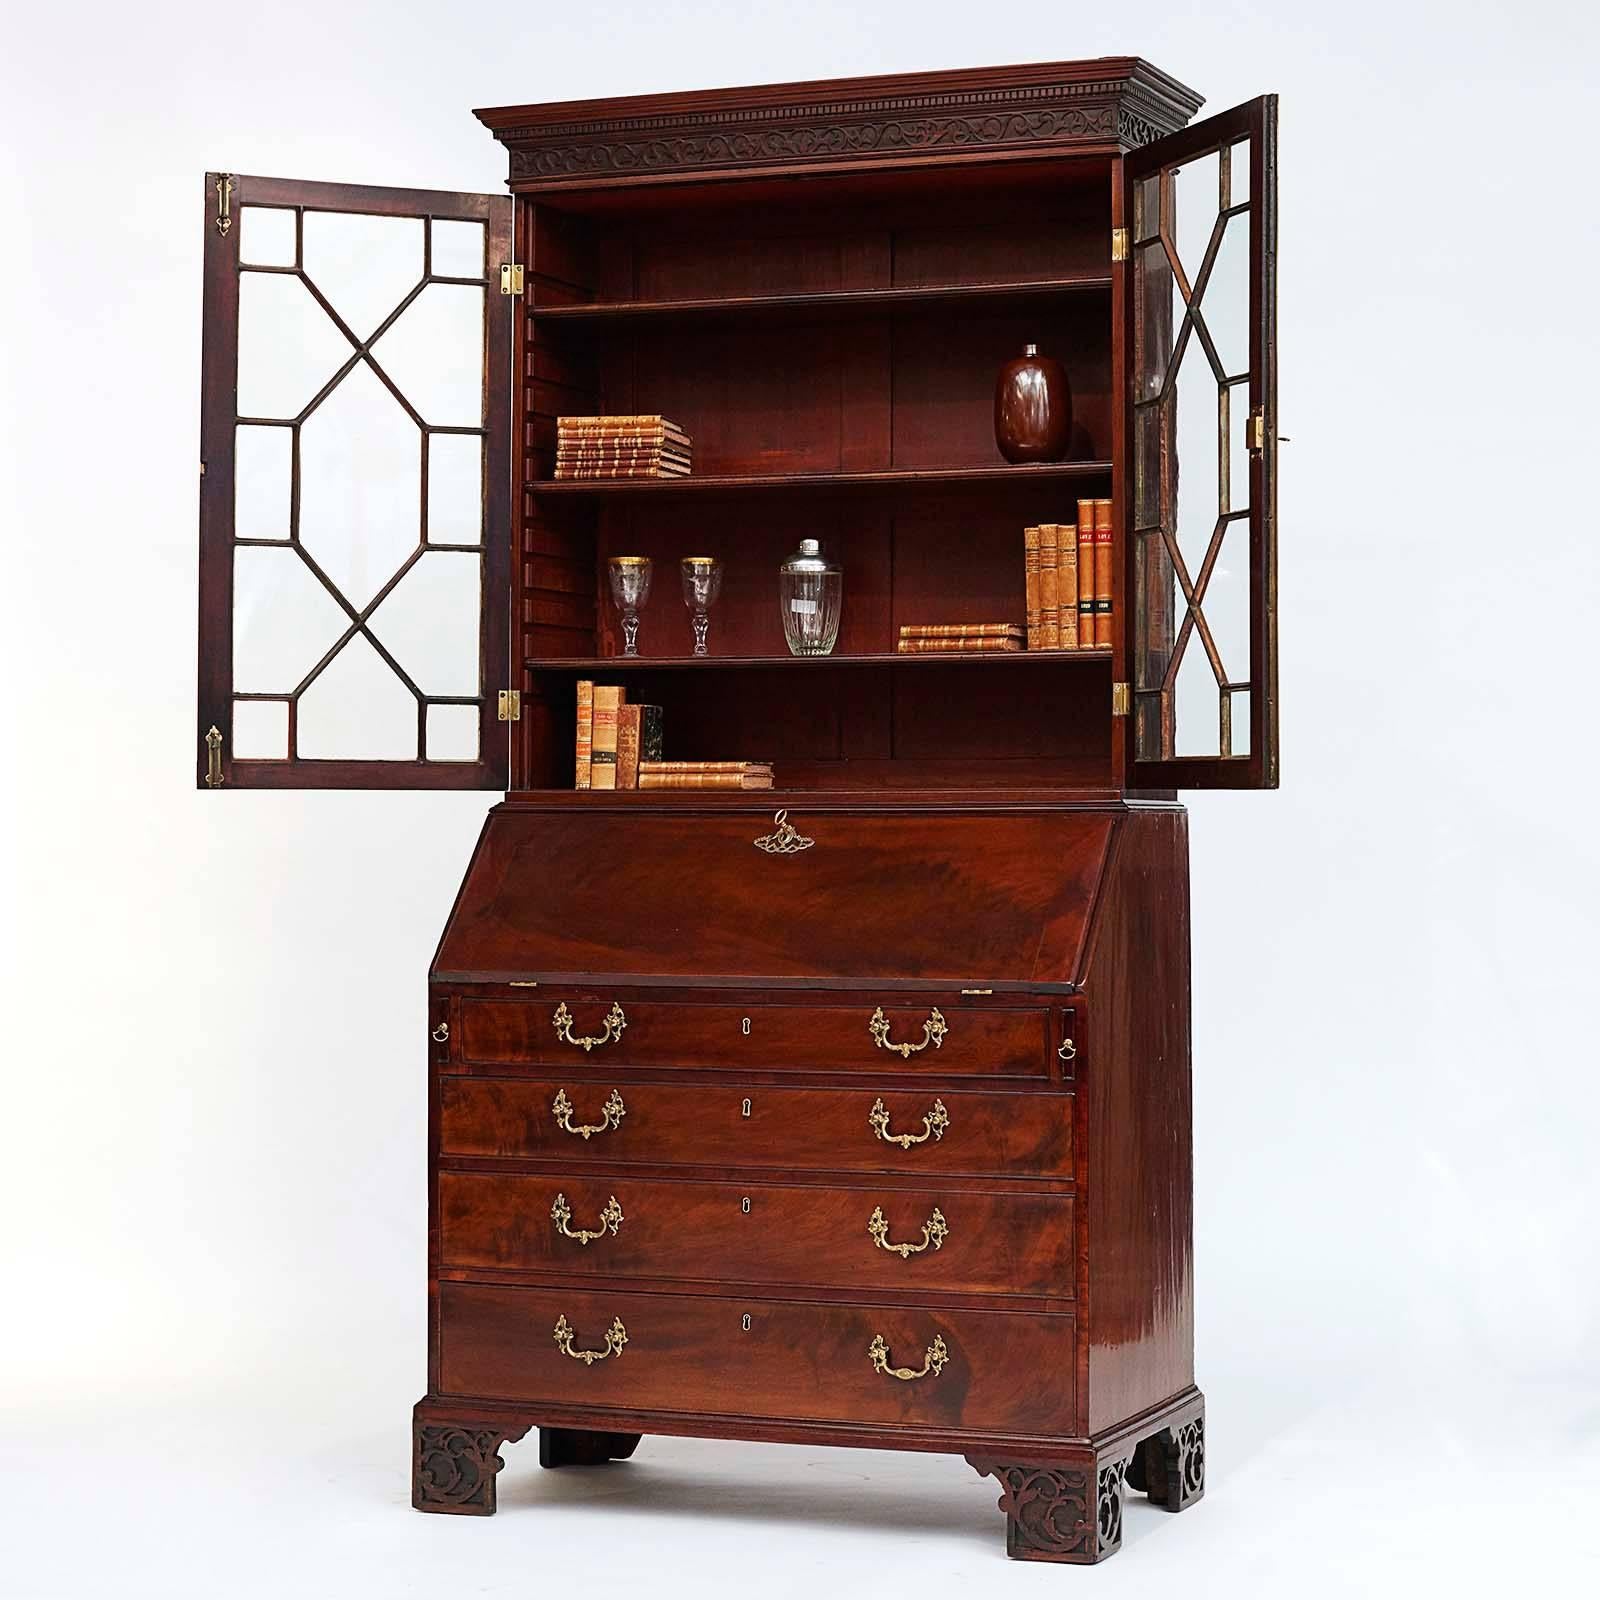 An English George III mahogany bureau bookcase, circa 1770s, the overhanging cornice with a carved leaf scrolled frieze, above a pair of astragal glazed doors, the slant front opening to a fitted interior with drawers and pigeon holes, above four